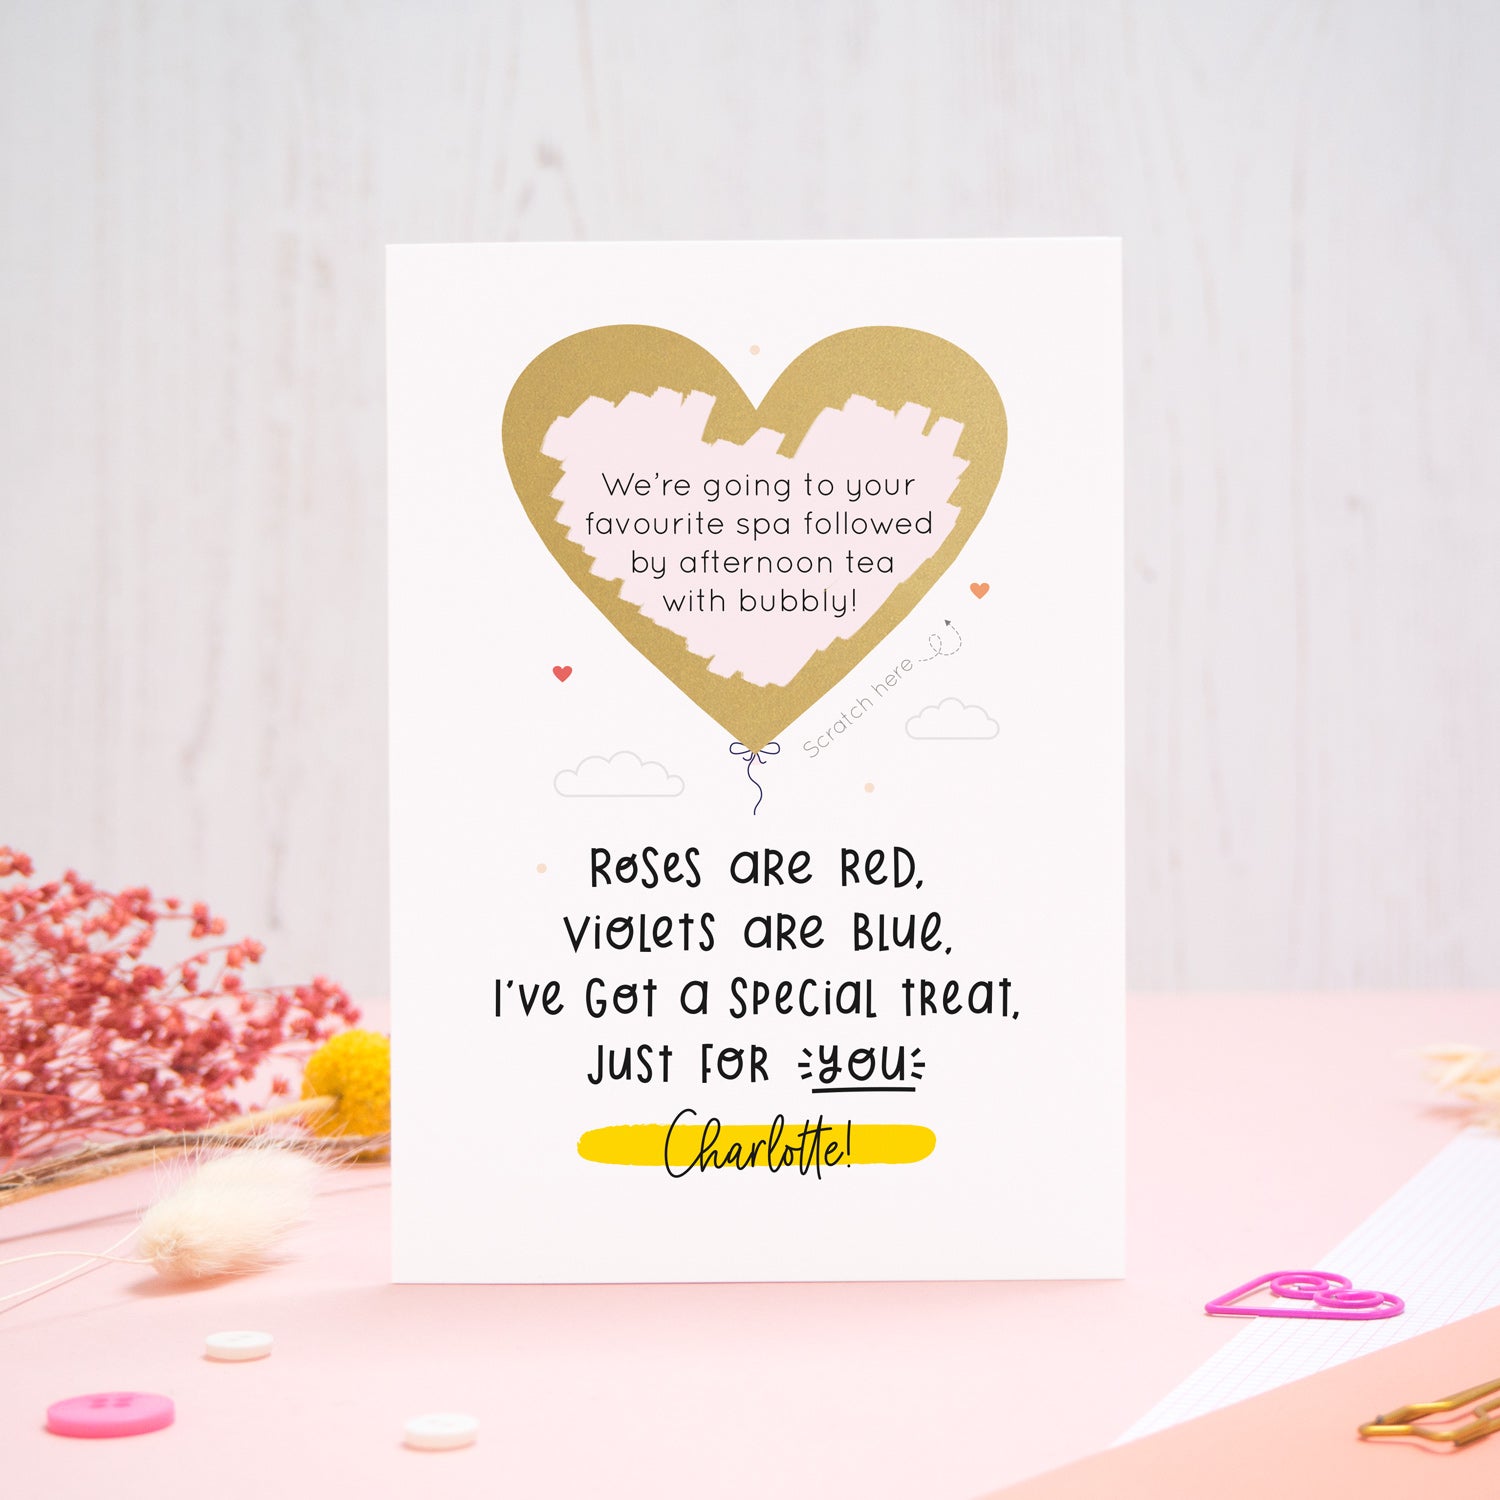 A personalised anniversary scratch card photographed on a pink and white background with floral props, paper clips, and buttons. This card shows the golden heart after it has been scratched off to reveal the secret message!